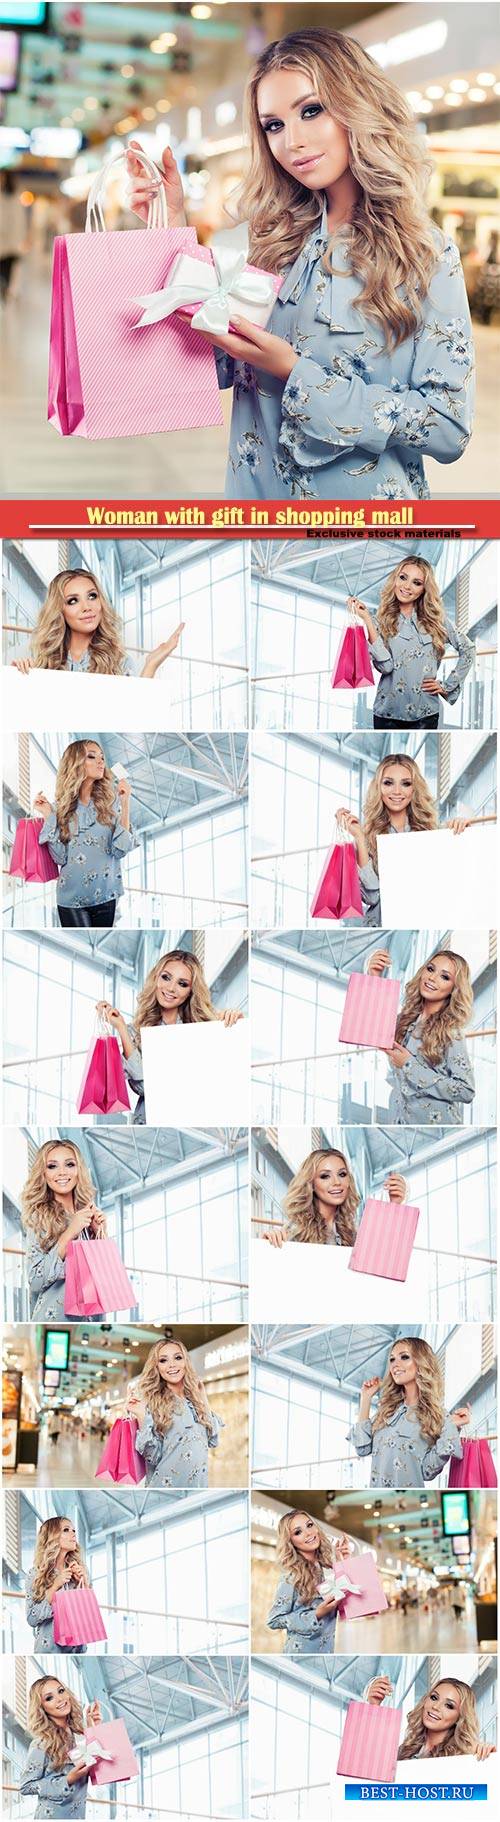 Happy beautiful woman fashion model with gift in shopping mall